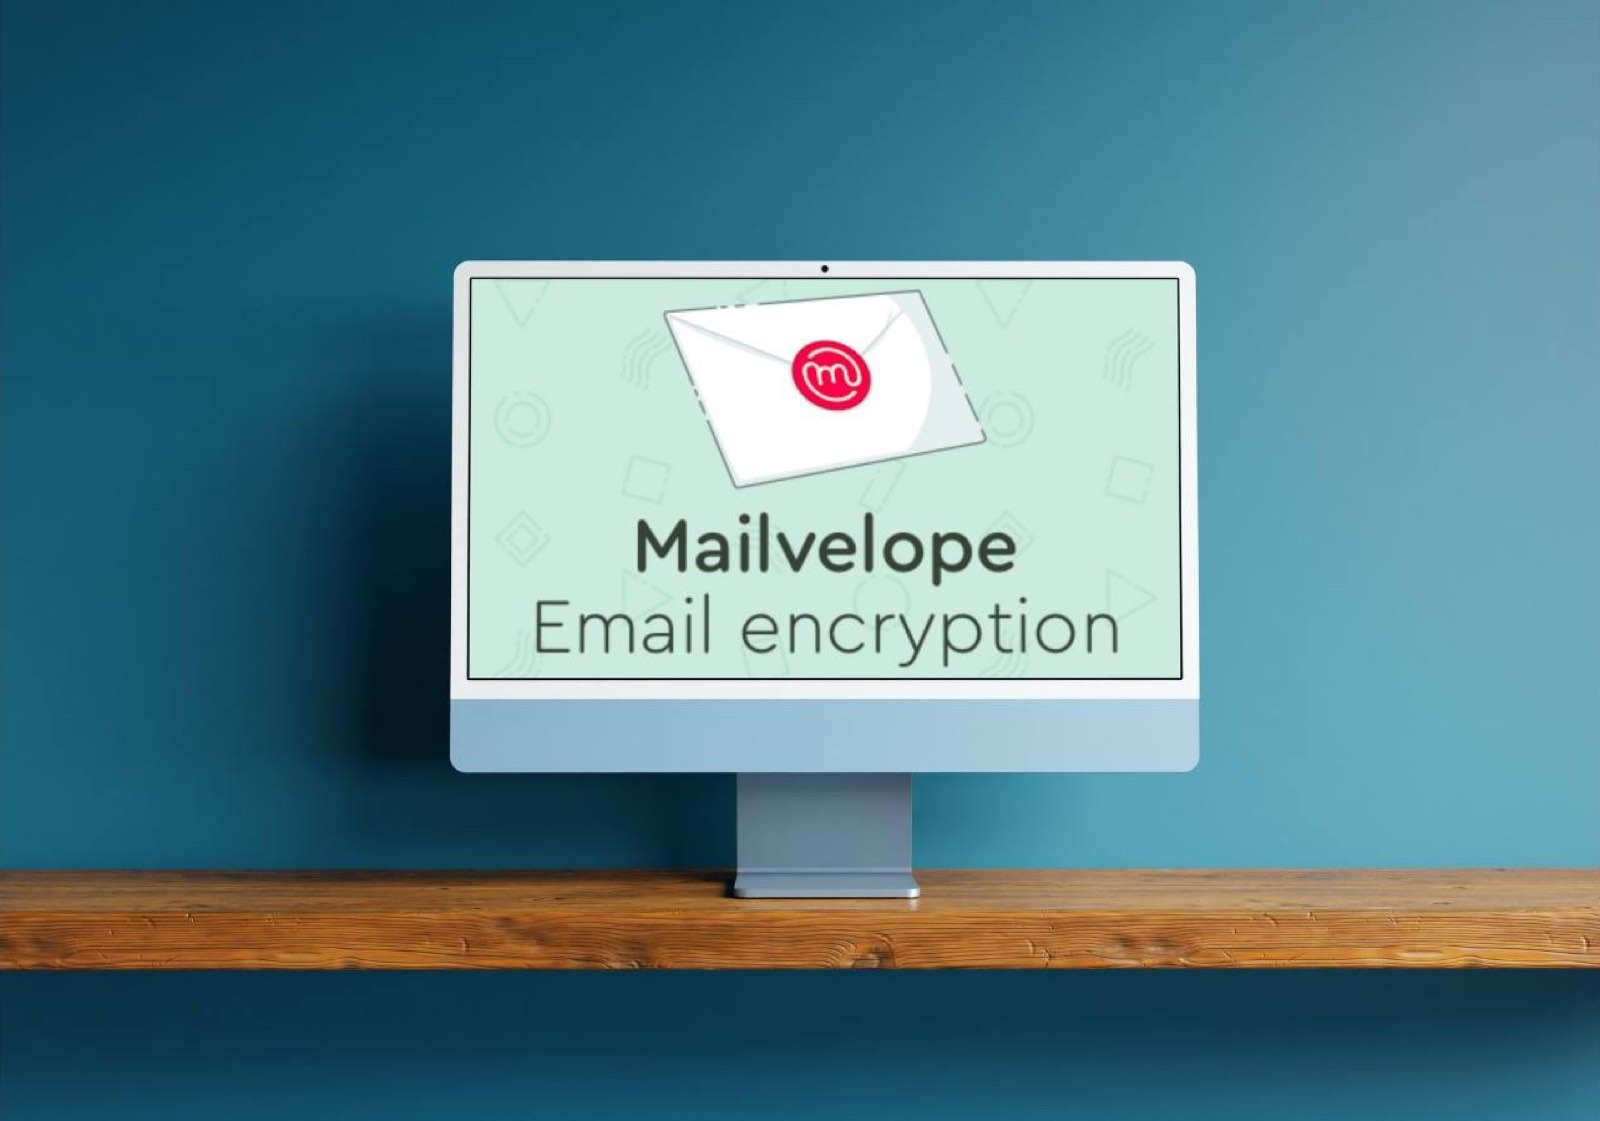 Mailvelope running on a computer screen